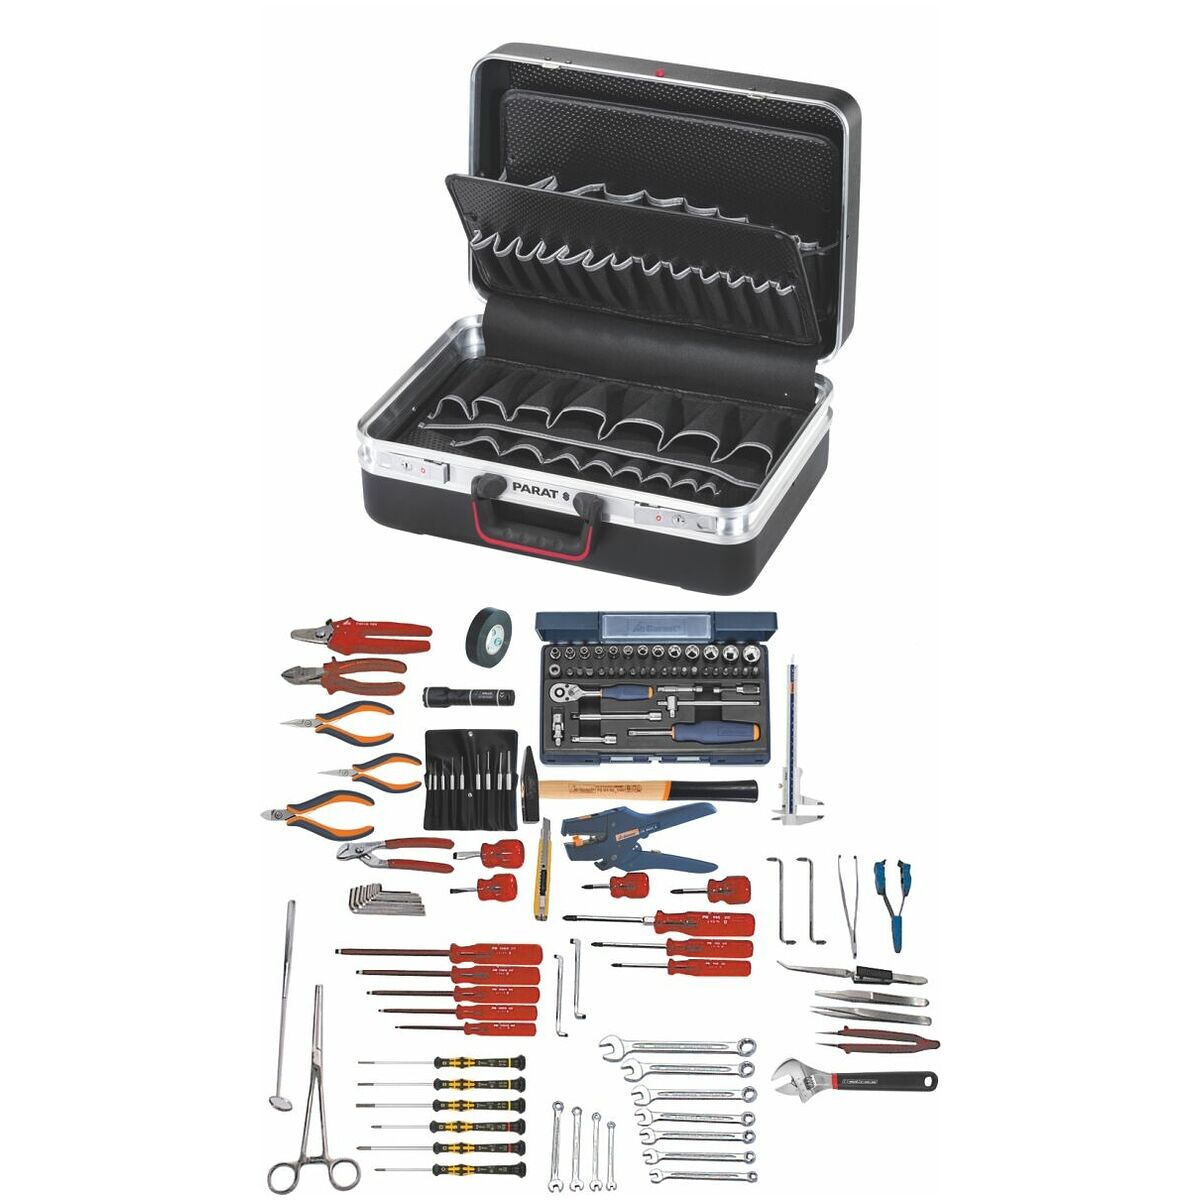 Simply buy Electronics aluminium Hoffmann 692000 119 kit with case No. tool | tool Group pieces